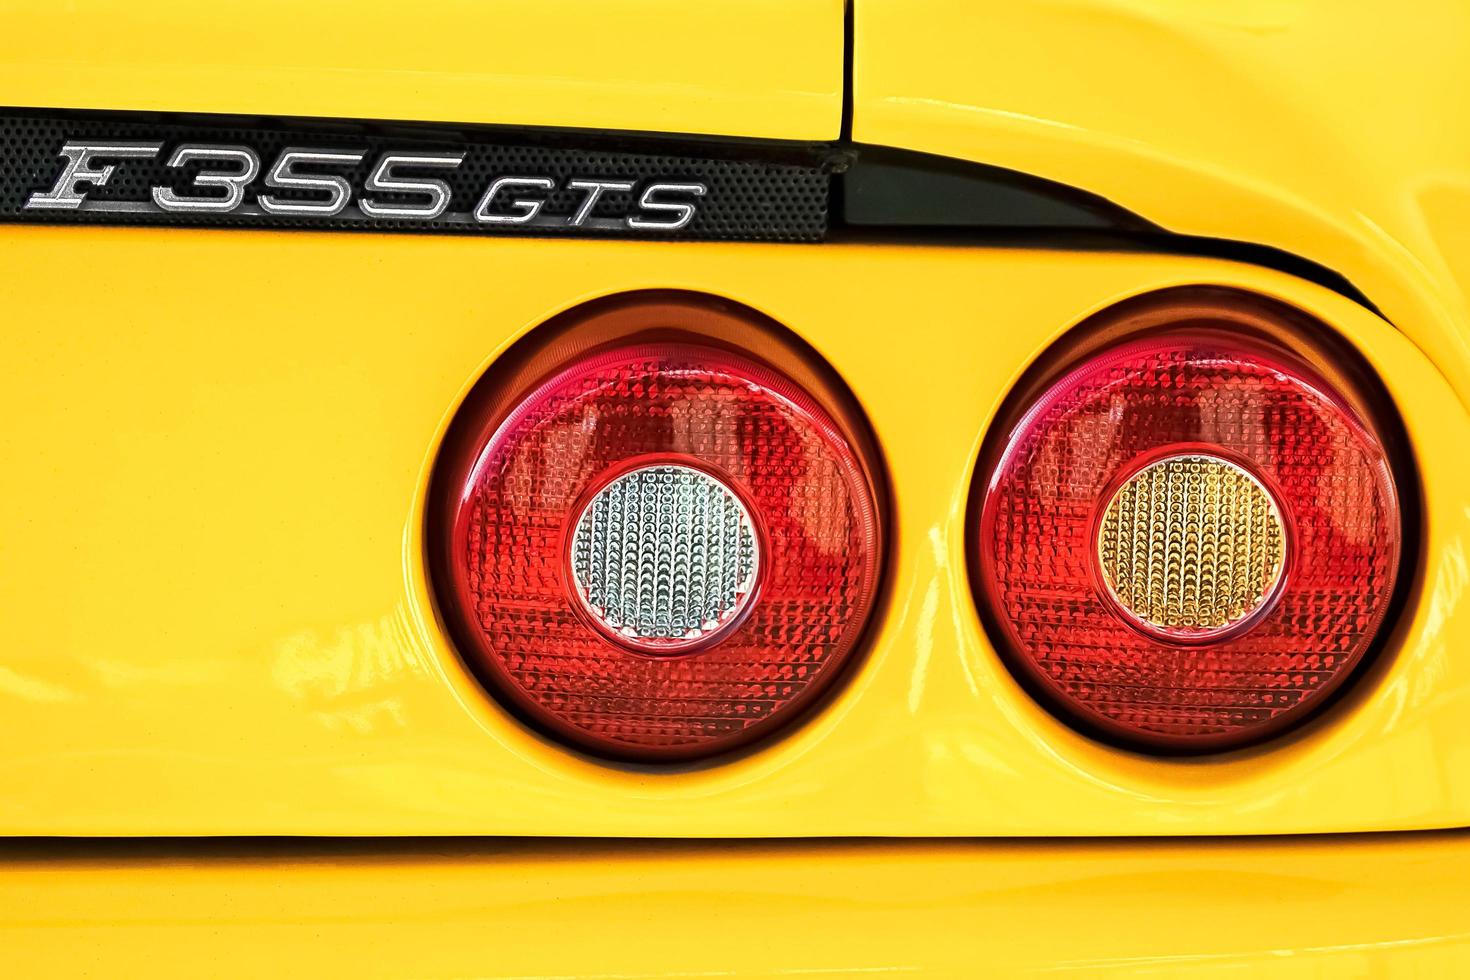 Andover, Hampshire, UK, 2009. F355 GTS Rear Light Cluster photo